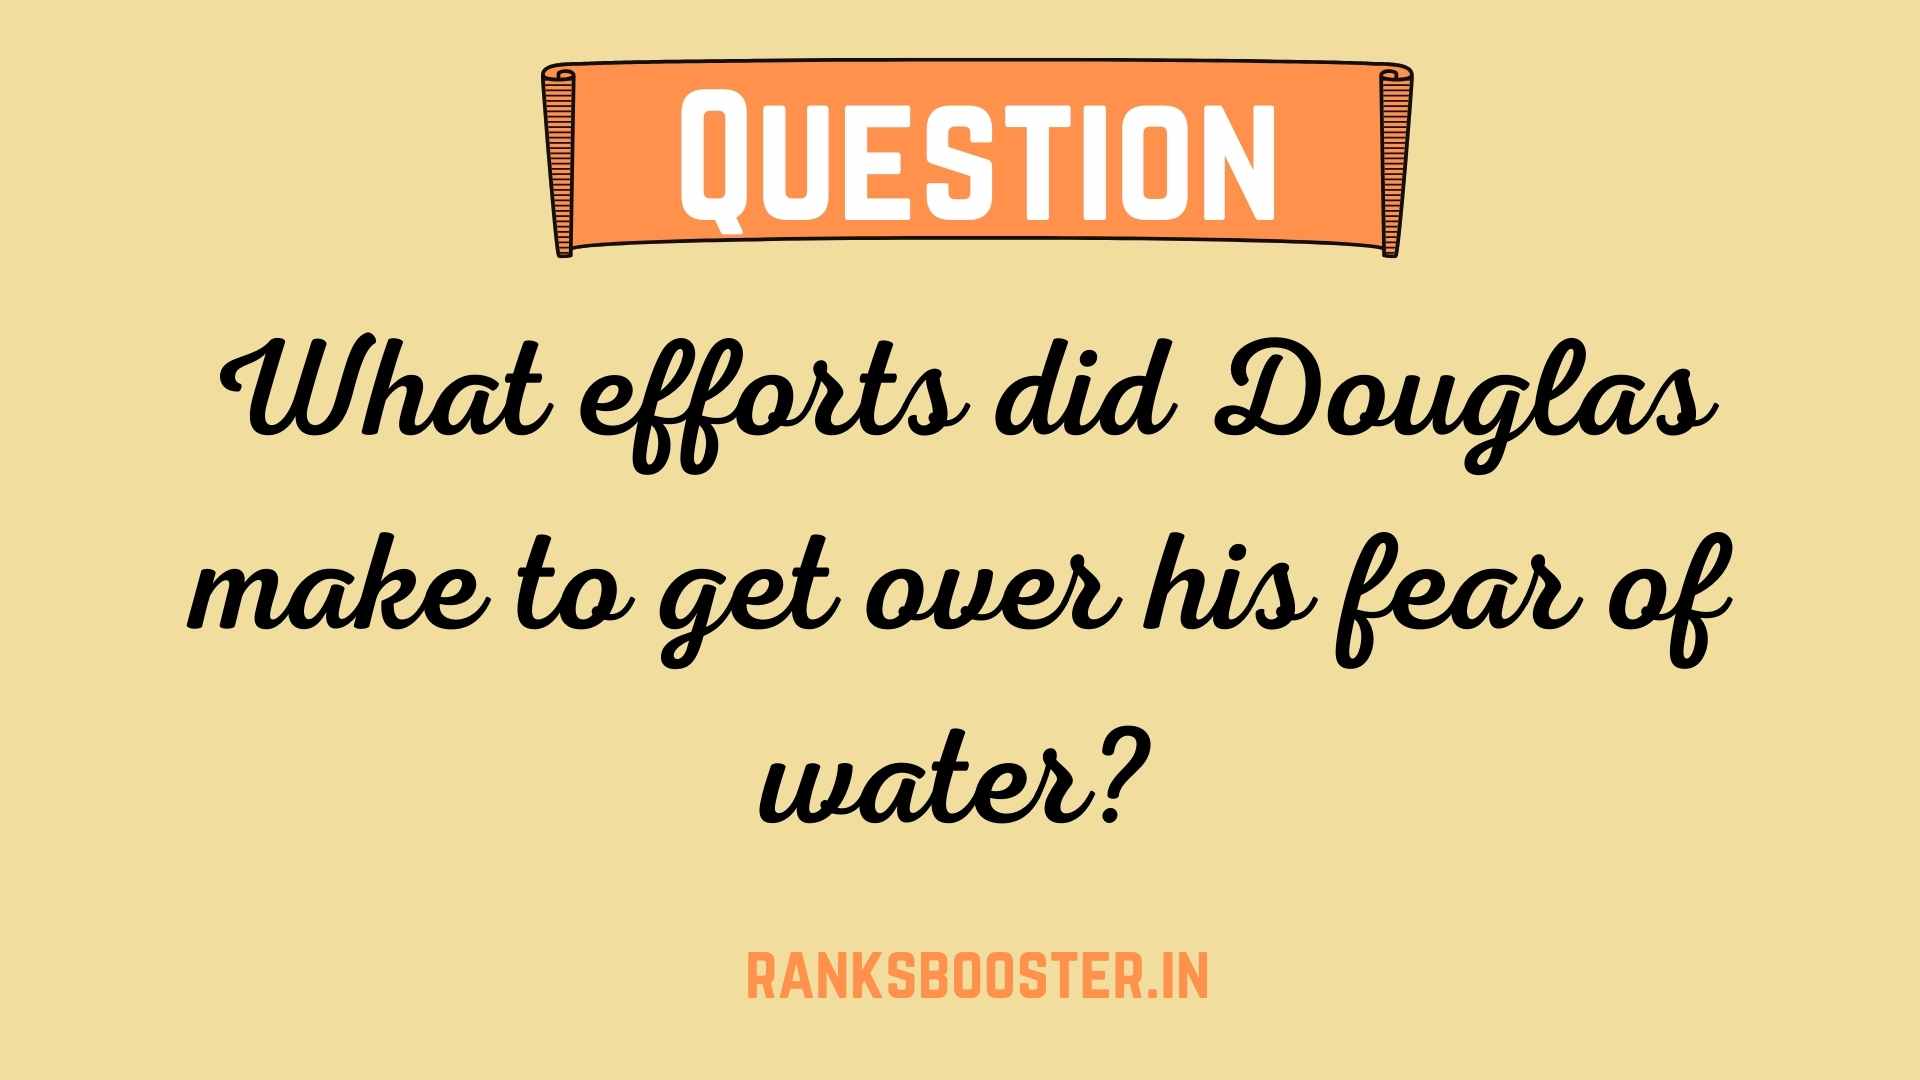 What efforts did Douglas make to get over his fear of water?